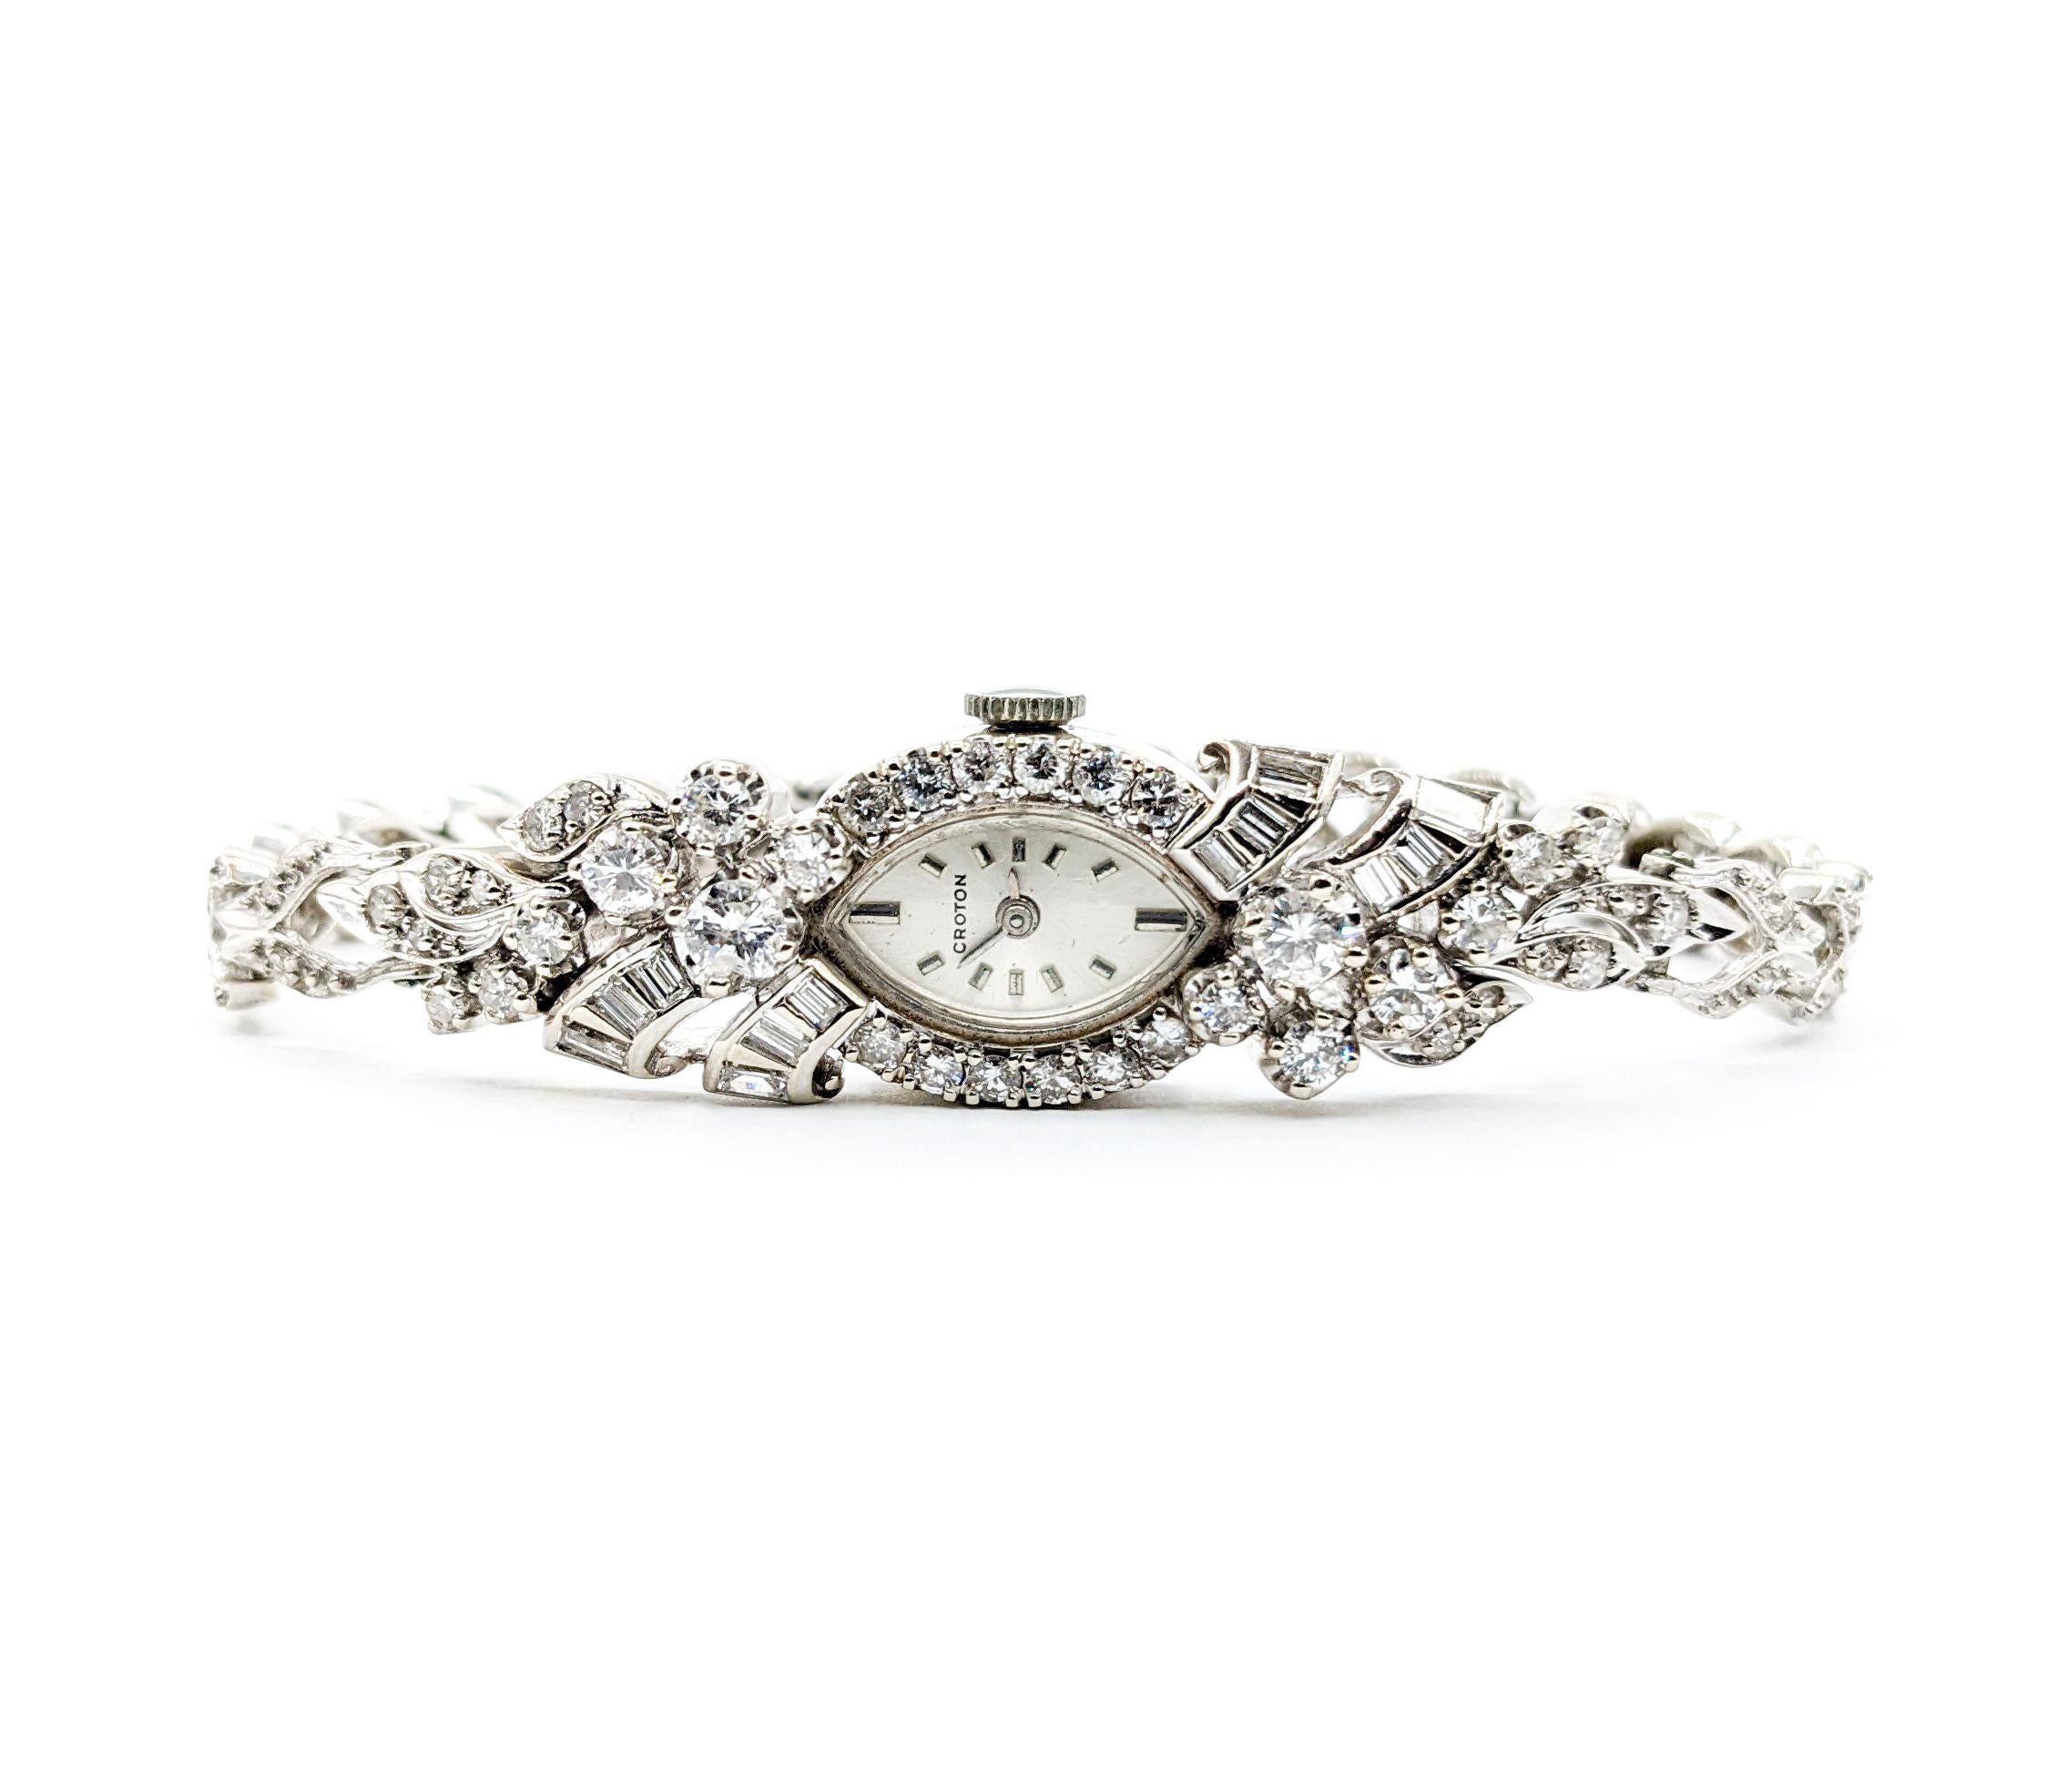 Bejeweled Vintage 3.00ctw Diamond Croton Ladies Watch

Introducing the stunning Croton vintage watch, a true testament to timeless elegance. Meticulously crafted in 14k white gold, this beautiful timepiece is adorned with a captivating array of